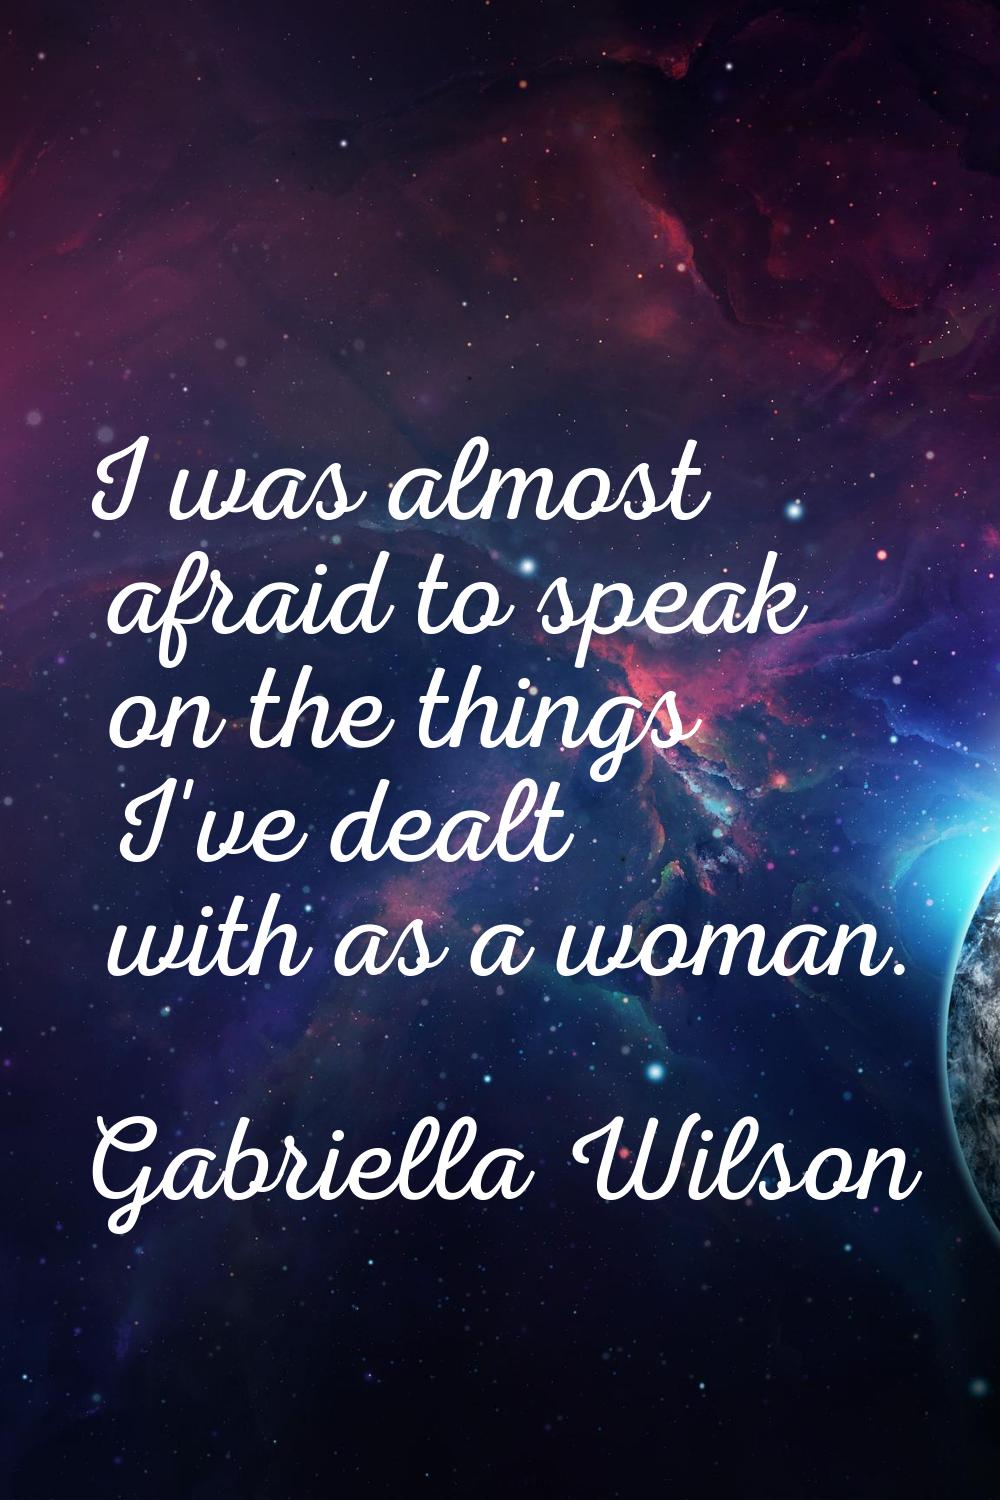 I was almost afraid to speak on the things I've dealt with as a woman.